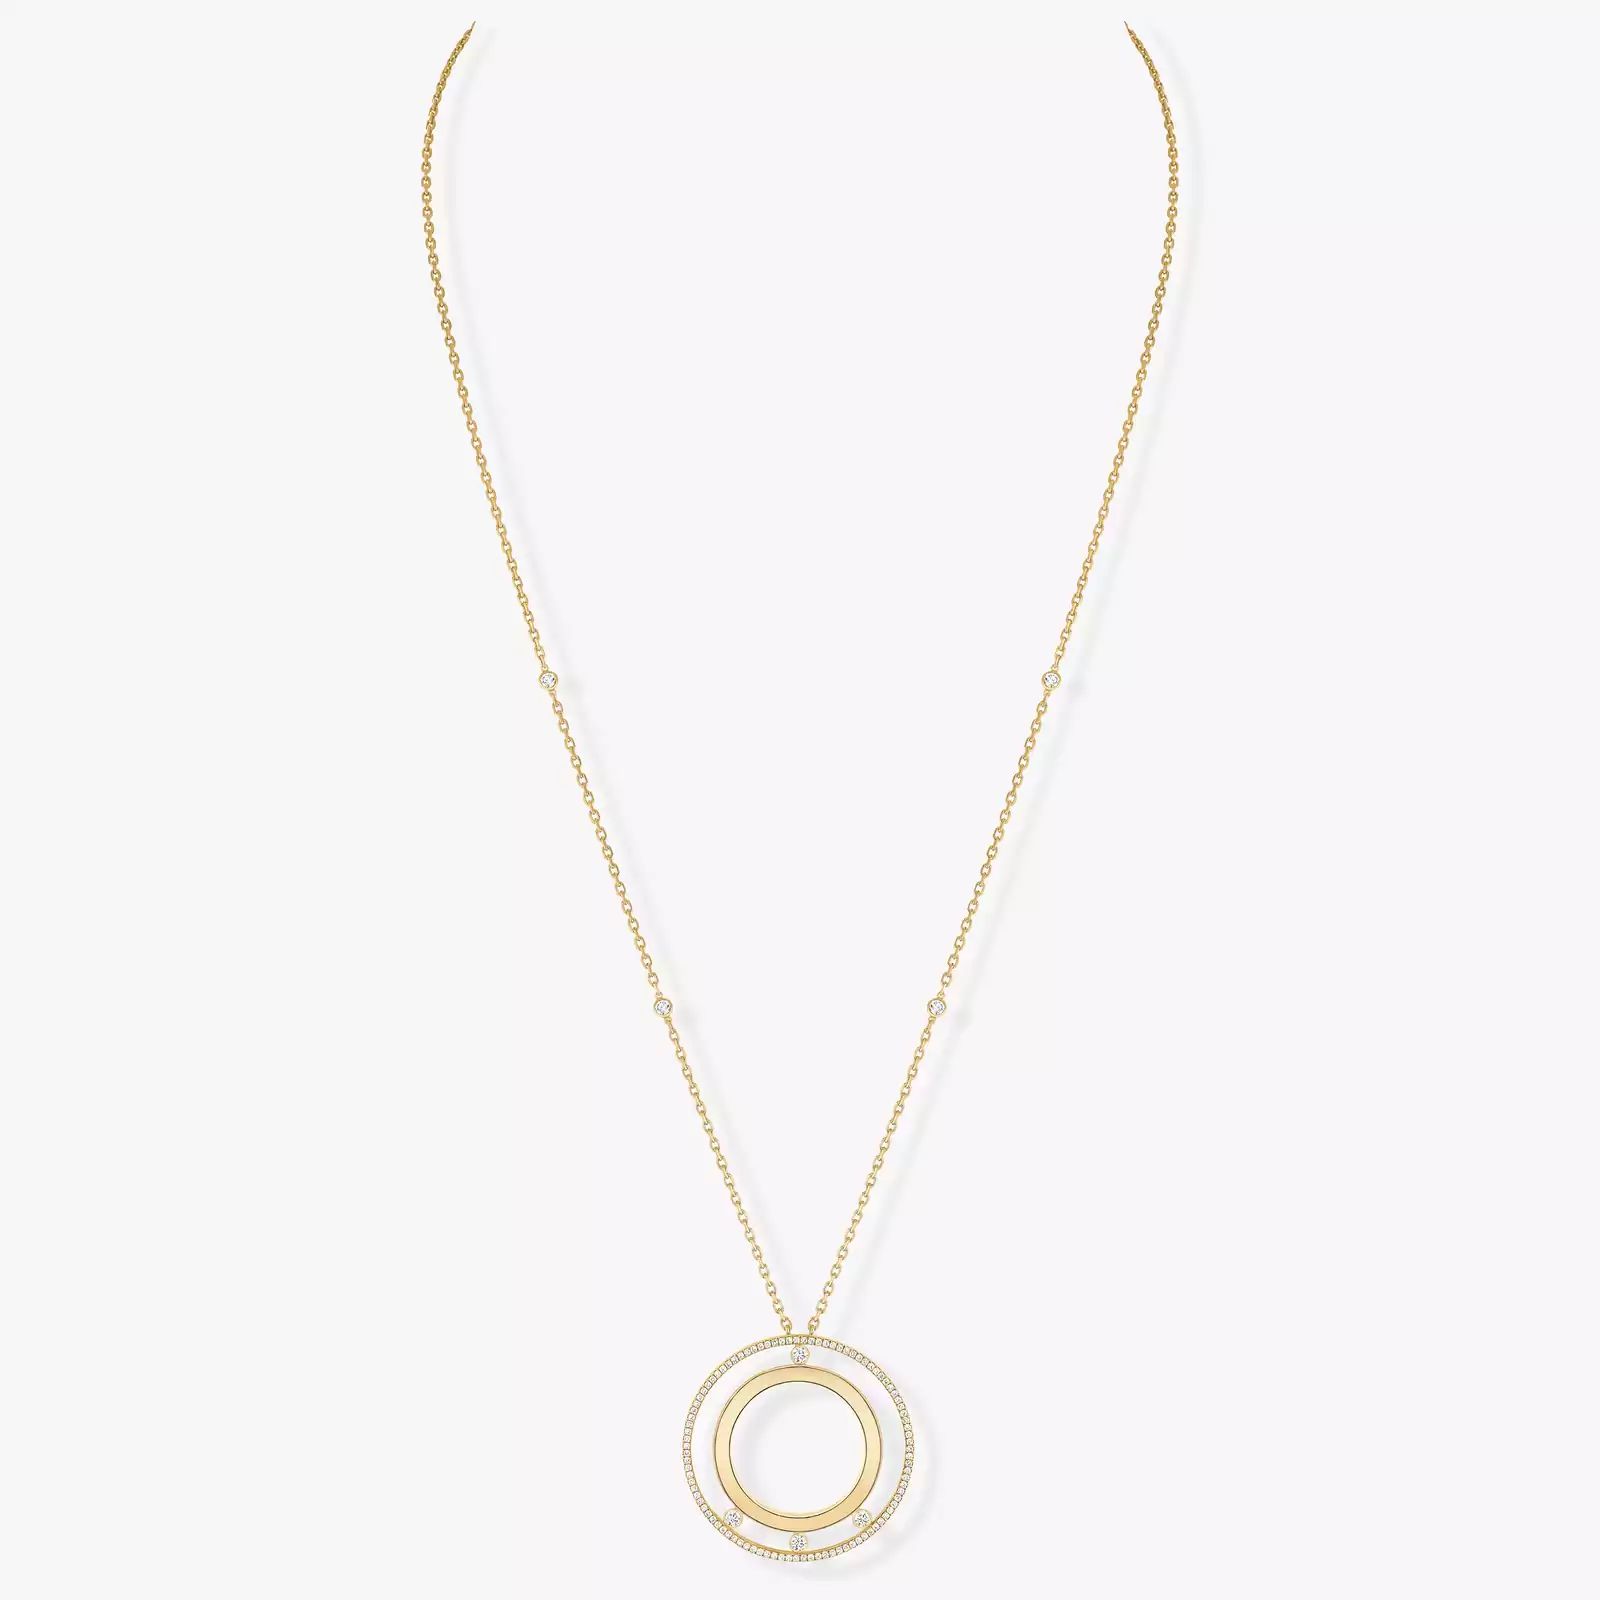 Lange Move Romane Halskette Yellow Gold For Her Diamond Necklace 11169-YG